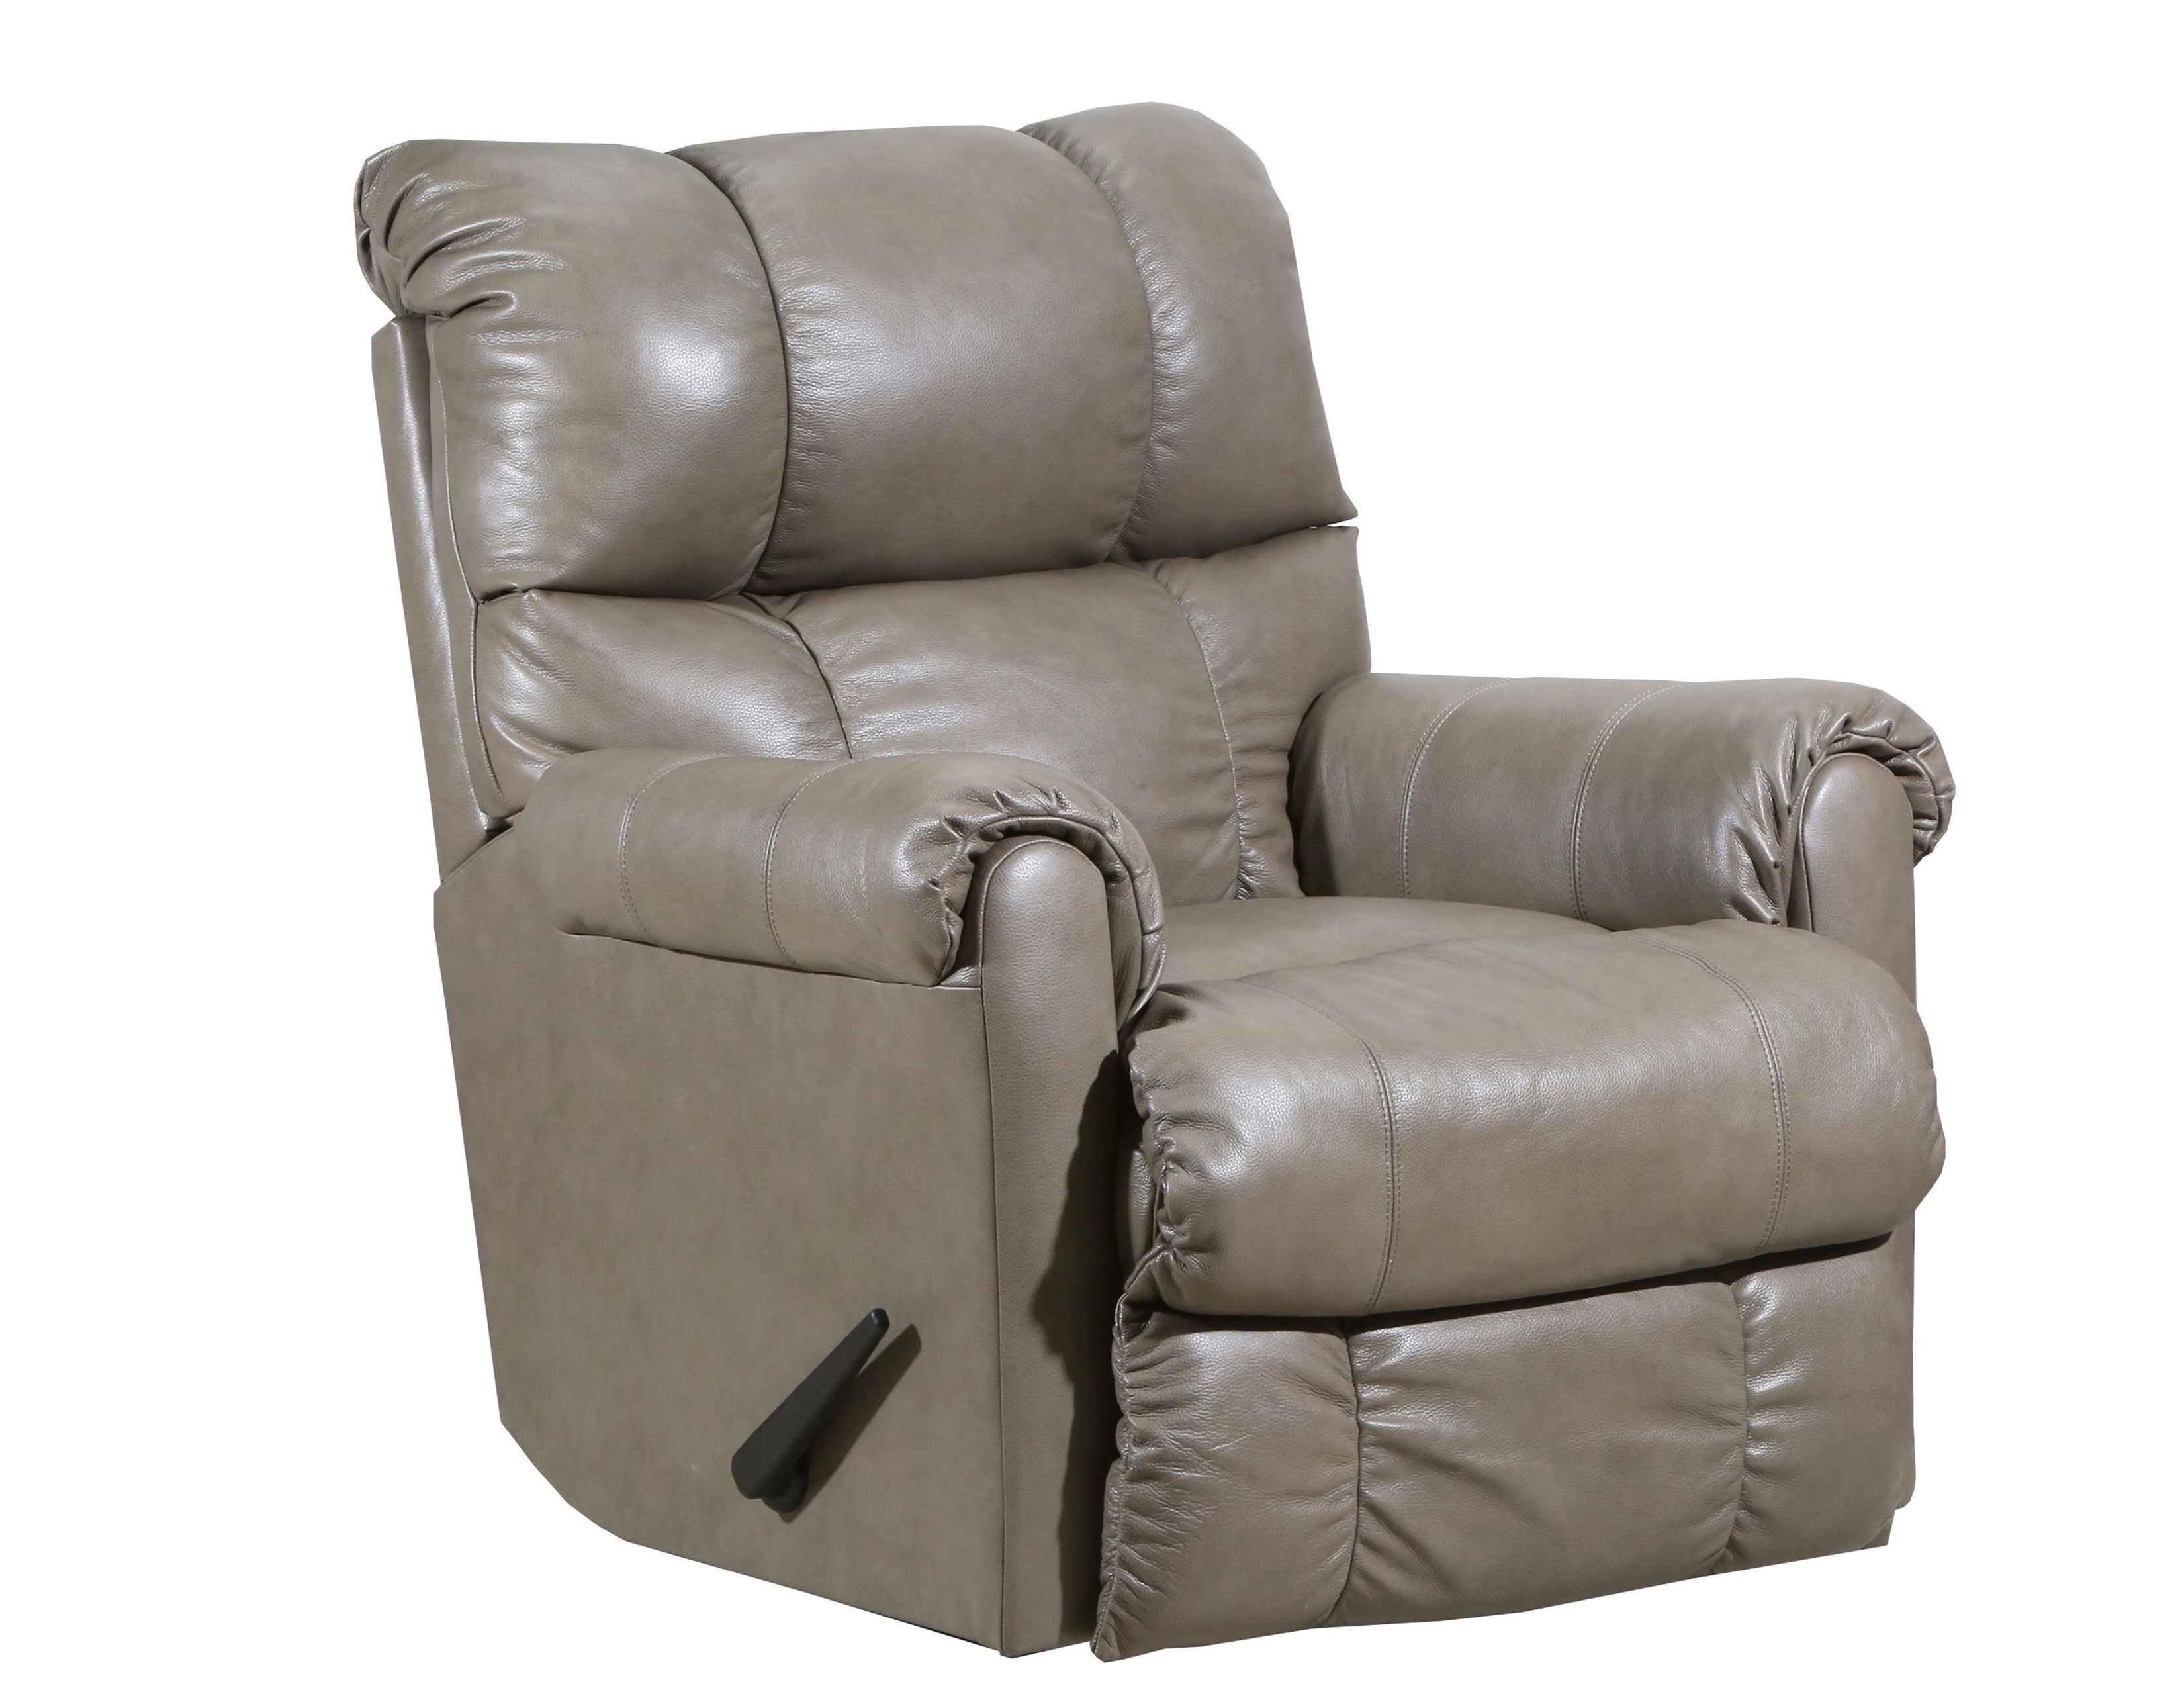 Avenger 4208 Leather Recliner 4 Colors, Rocking Leather Recliner